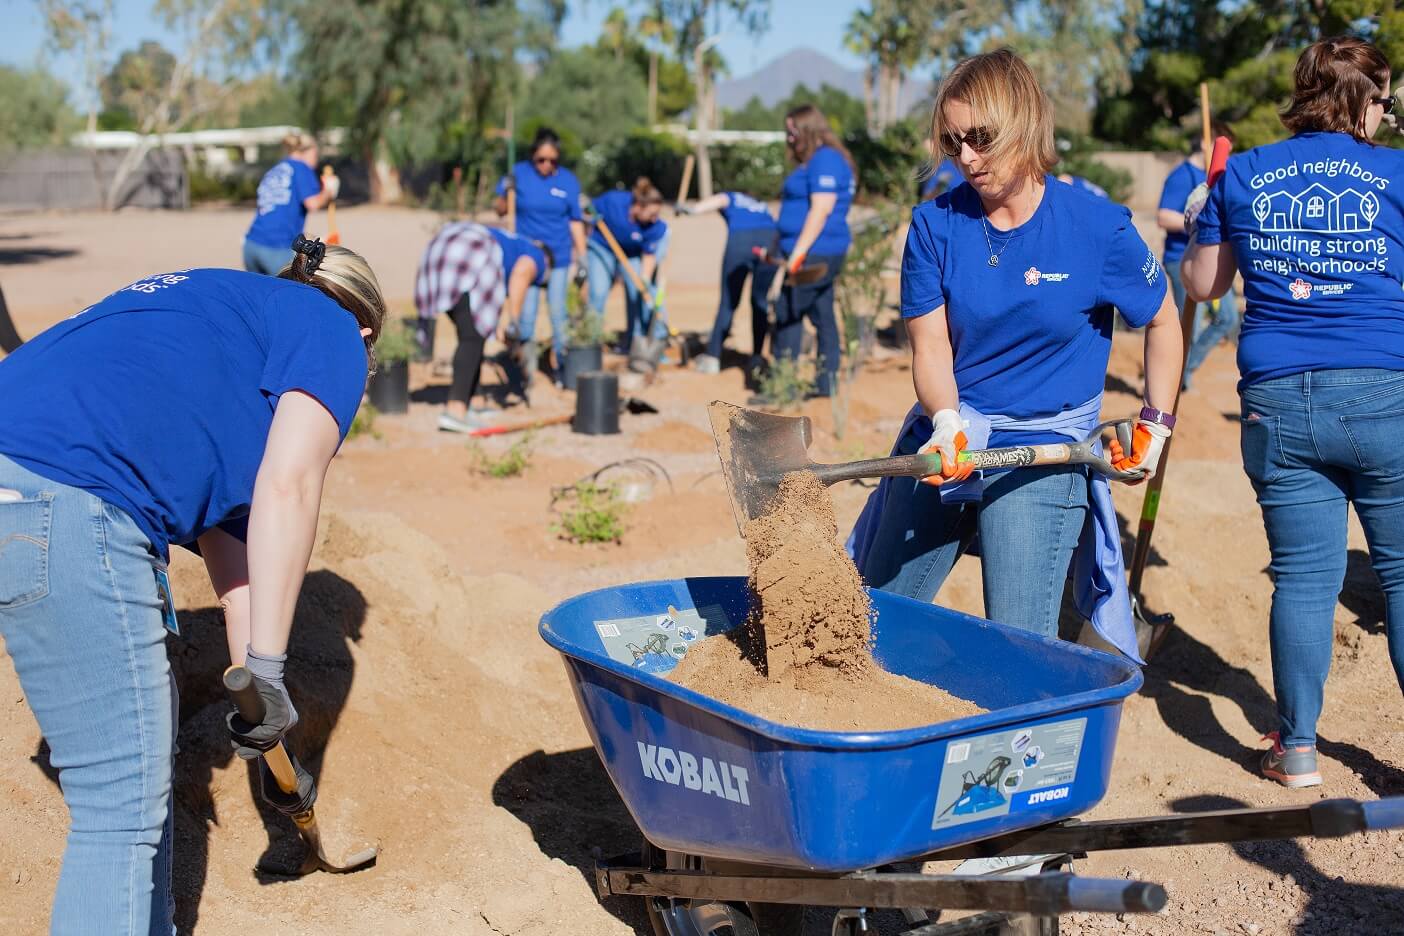 Volunteers digging in holes and transferring dirt into a wheelbarrow